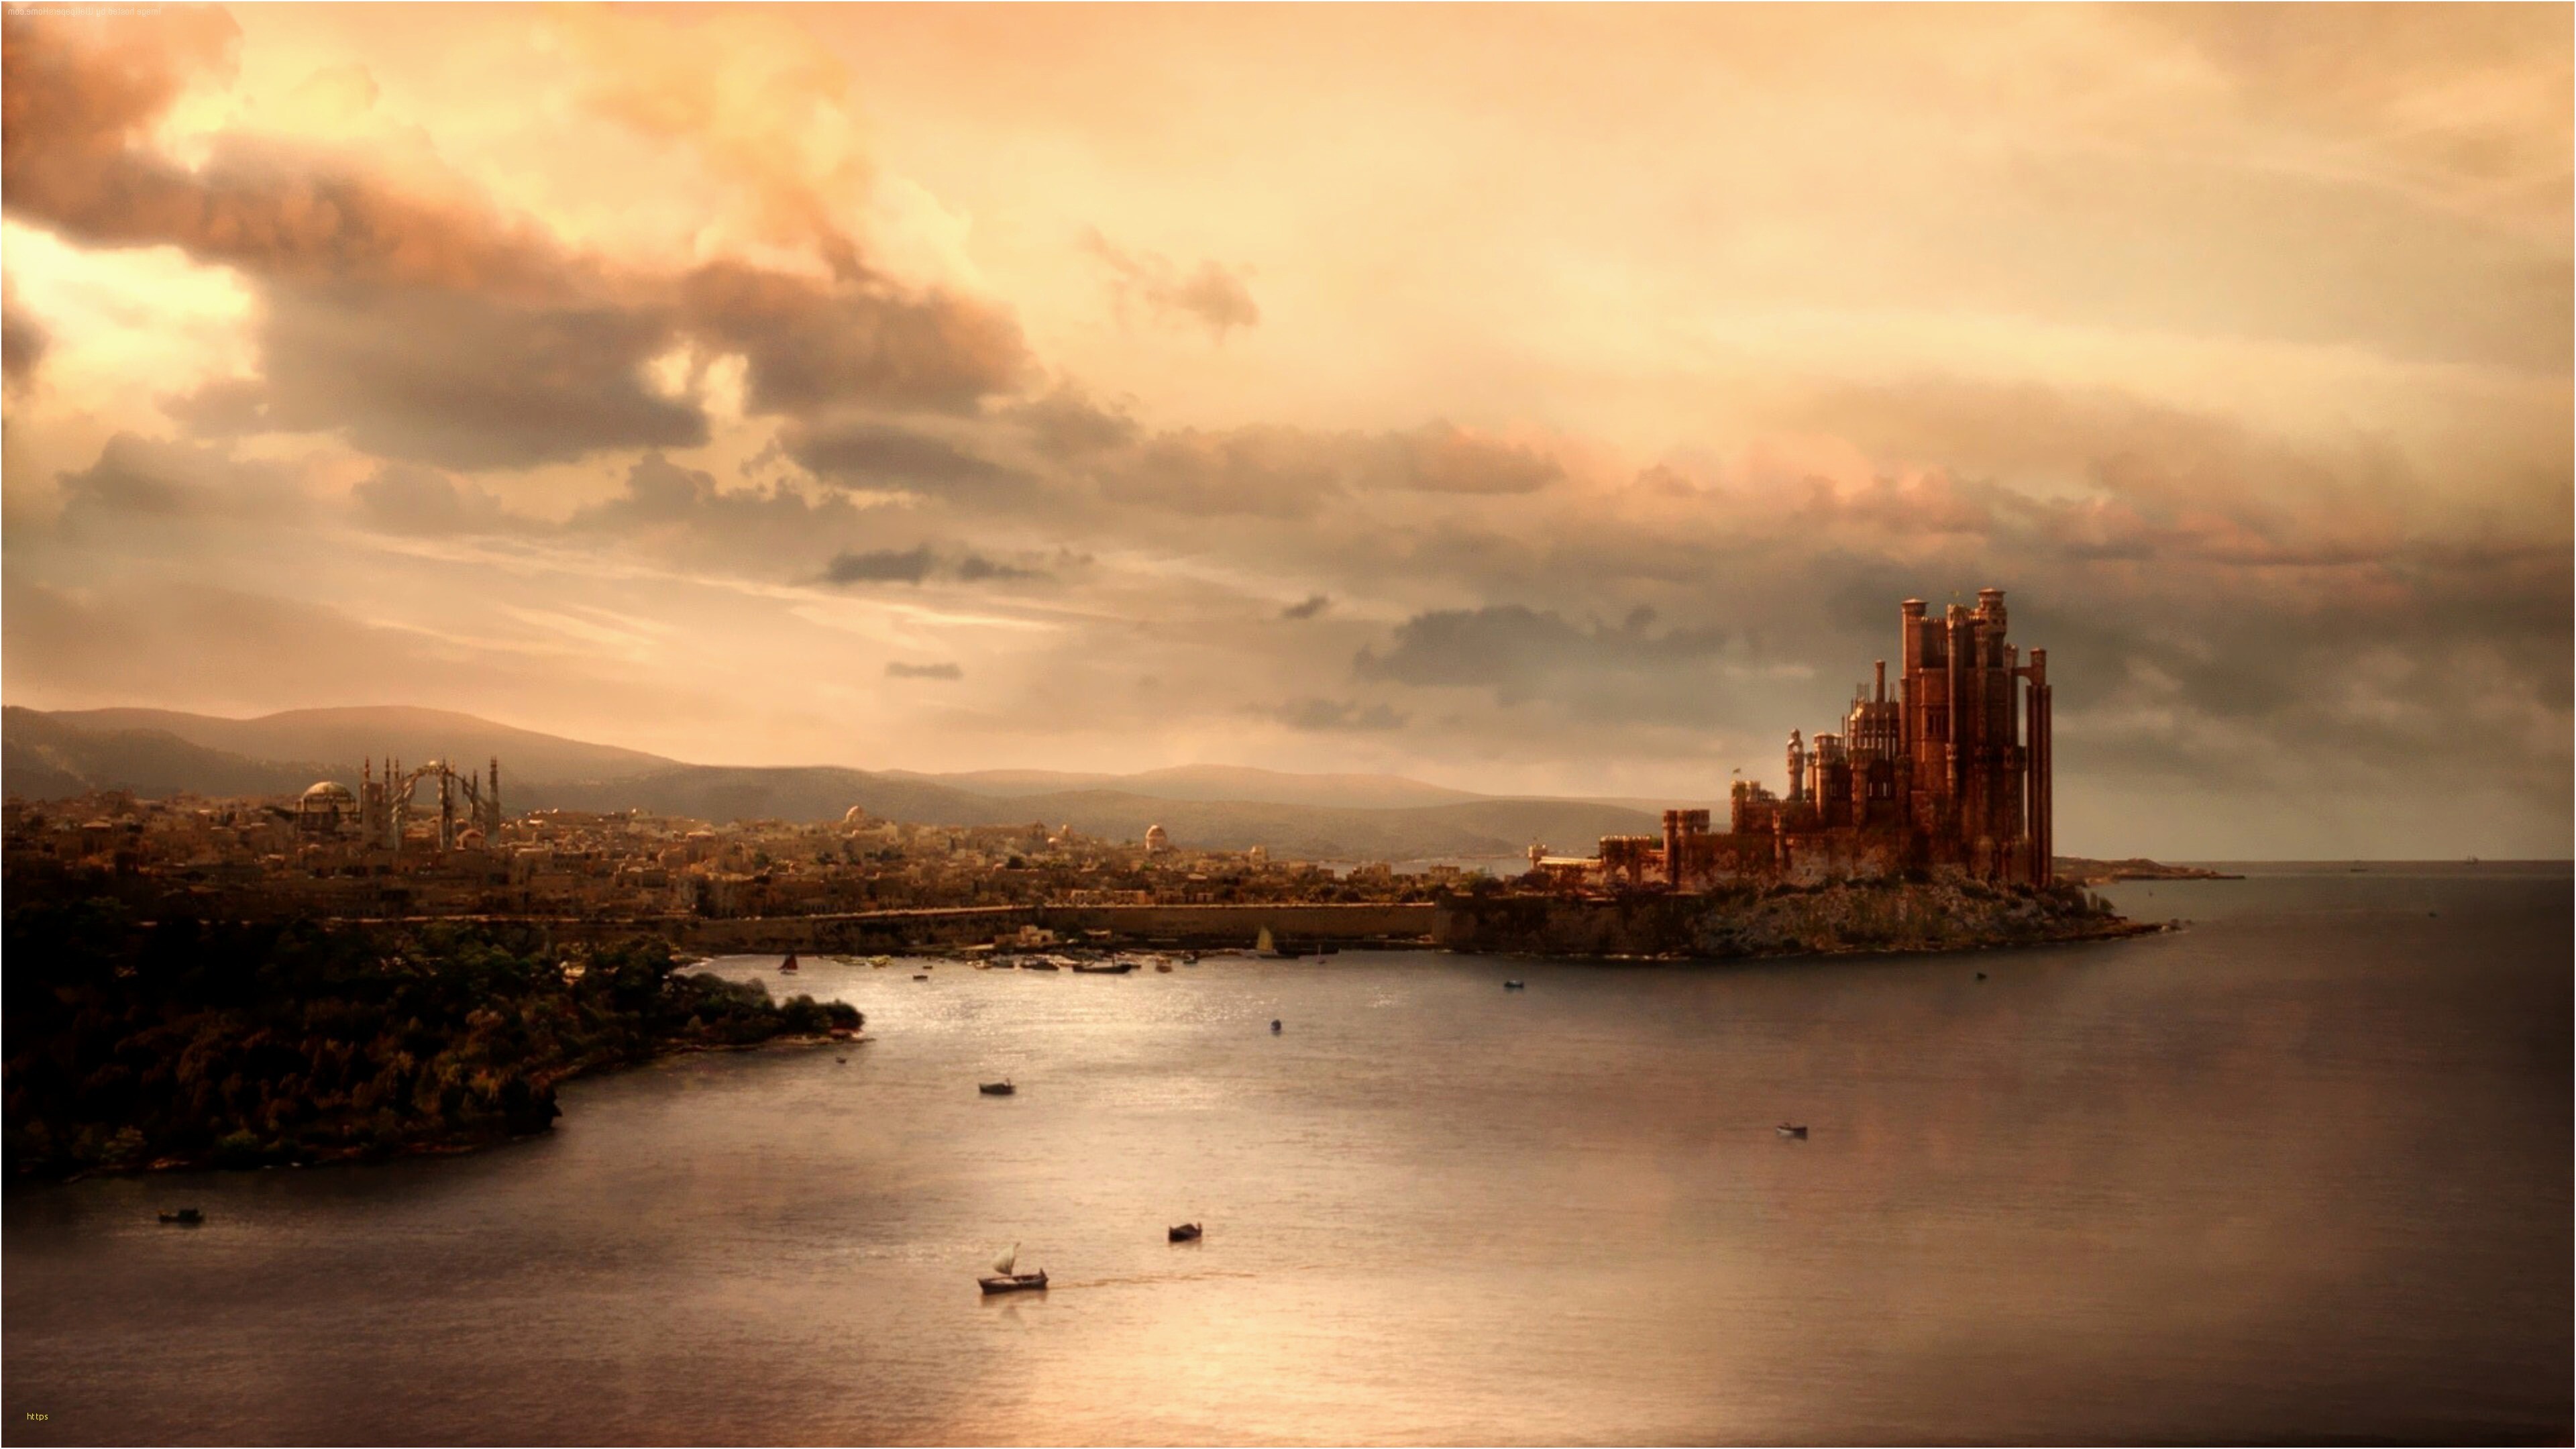 Game of Thrones: An American fantasy drama television series. 3840x2160 4K Wallpaper.